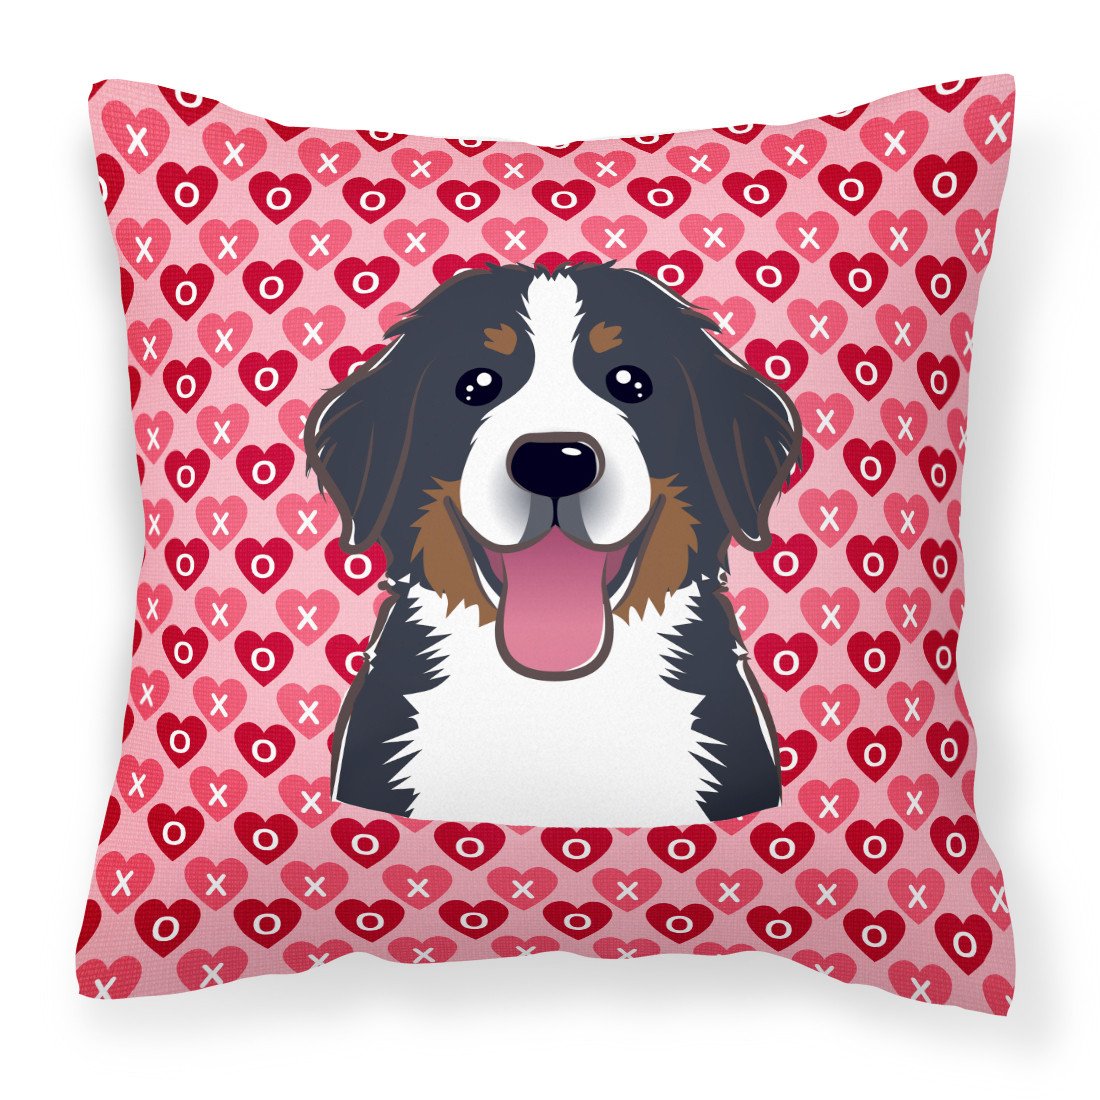 Bernese Mountain Dog Hearts Fabric Decorative Pillow BB5307PW1818 by Caroline's Treasures